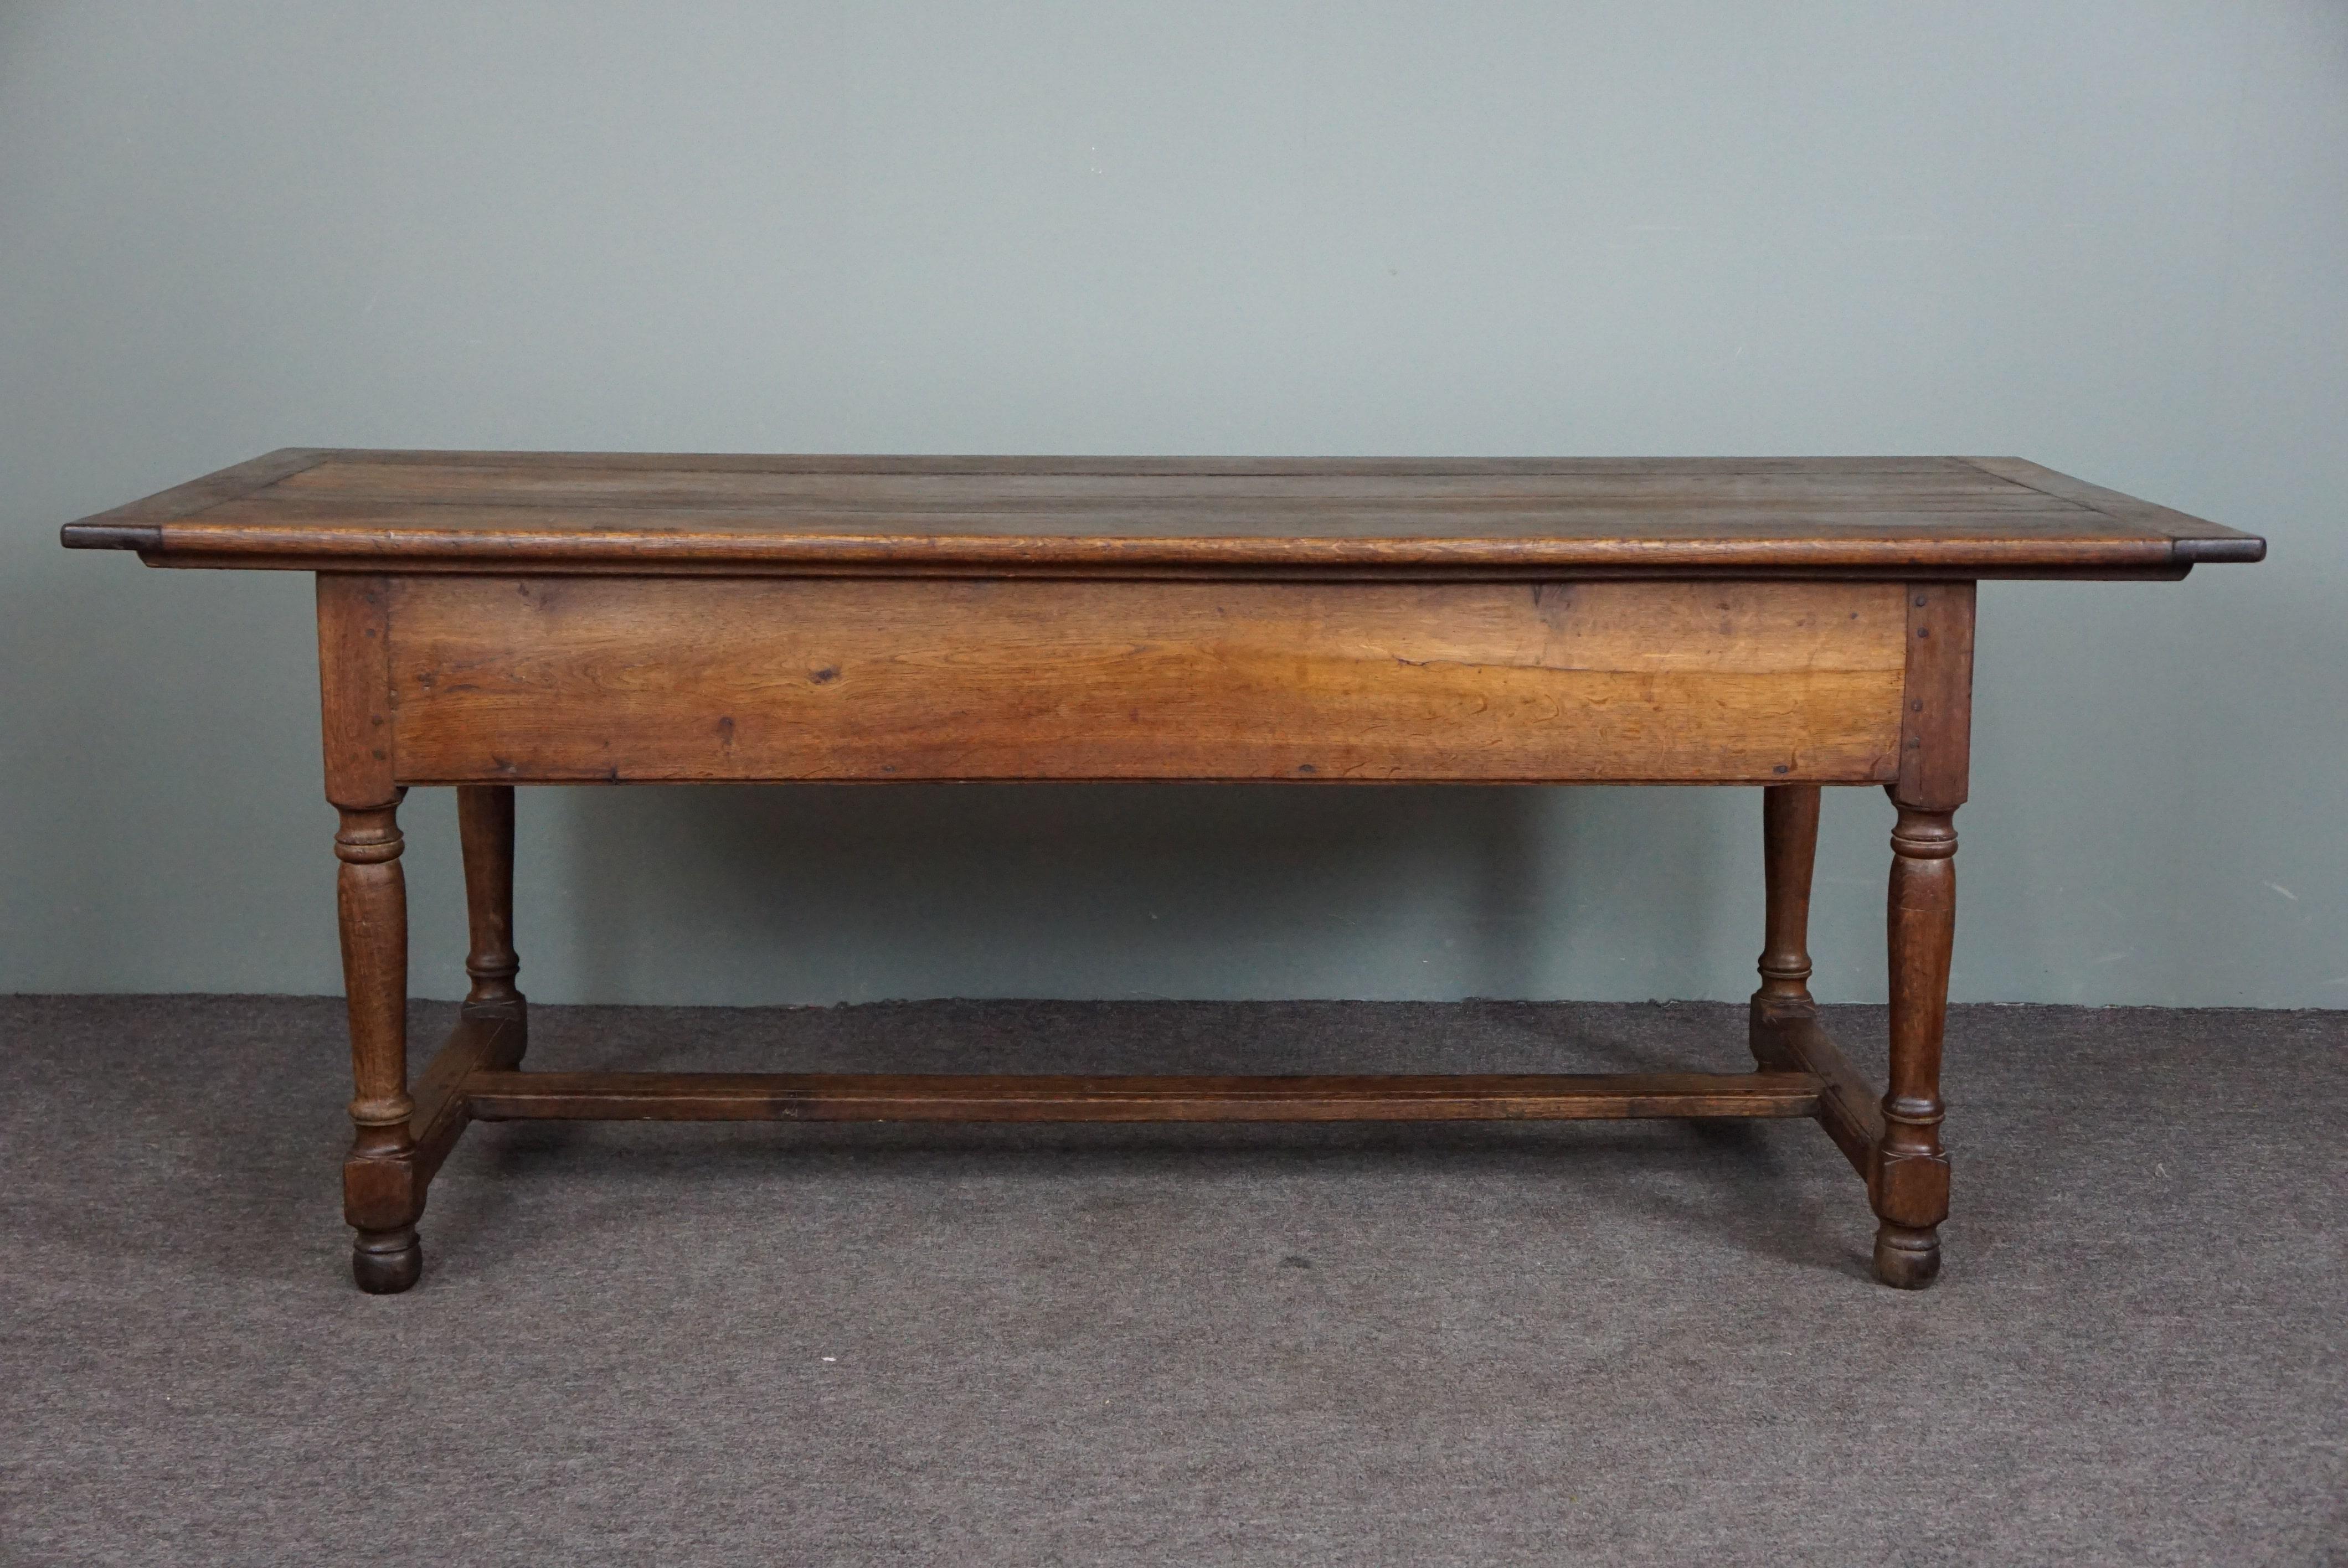 20th Century Antique side table/sideboard with storage space under the top For Sale